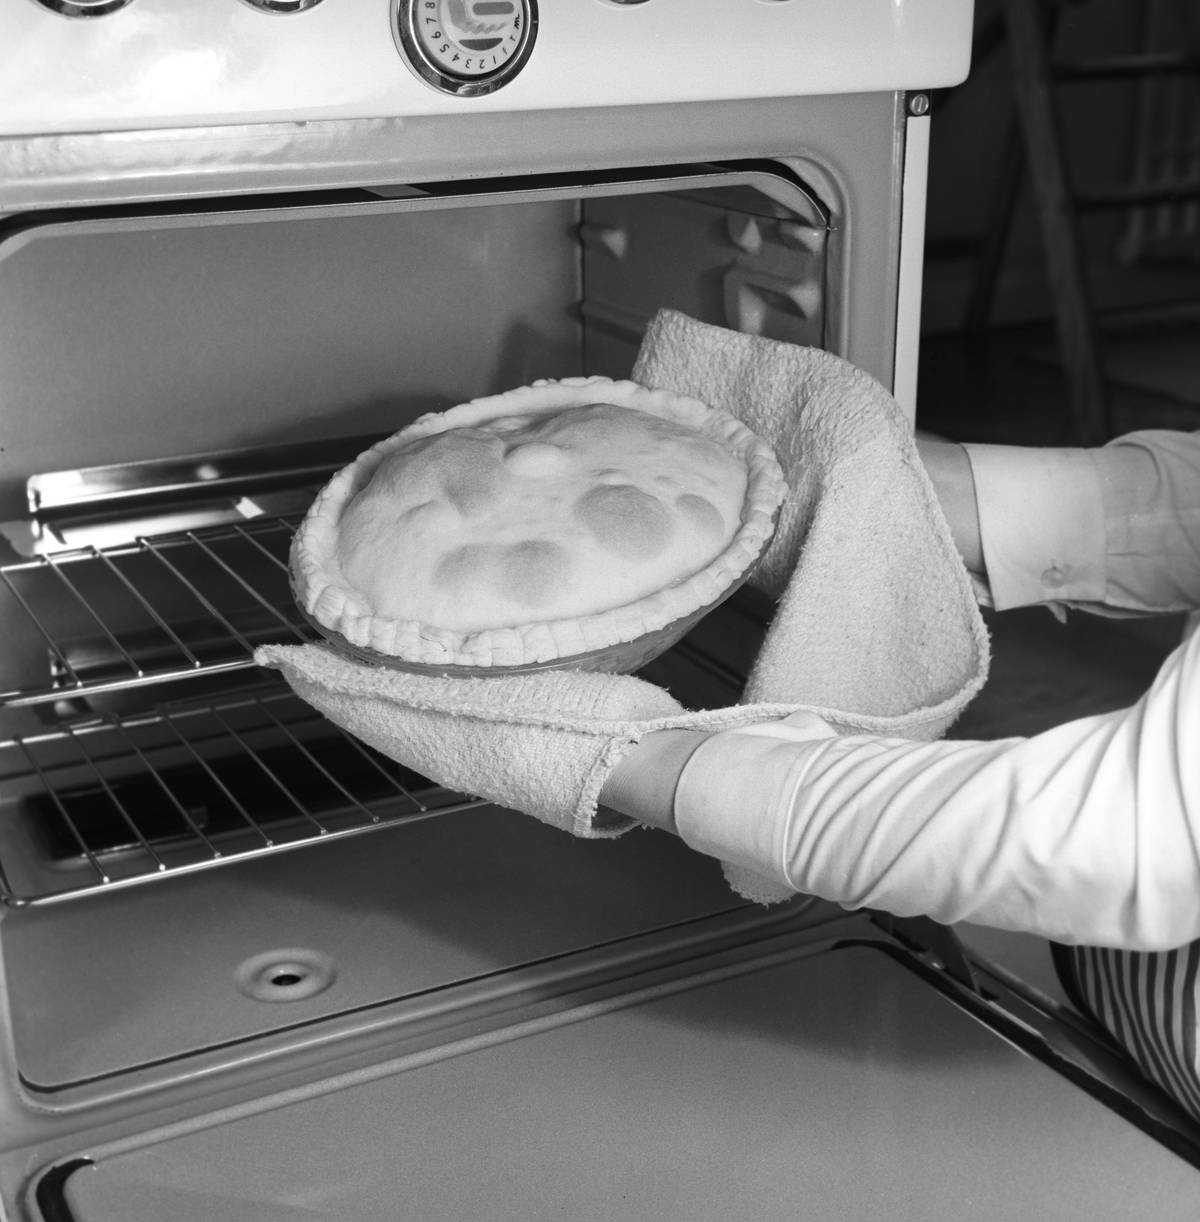 A woman takes a pie out of the oven with pot holders.